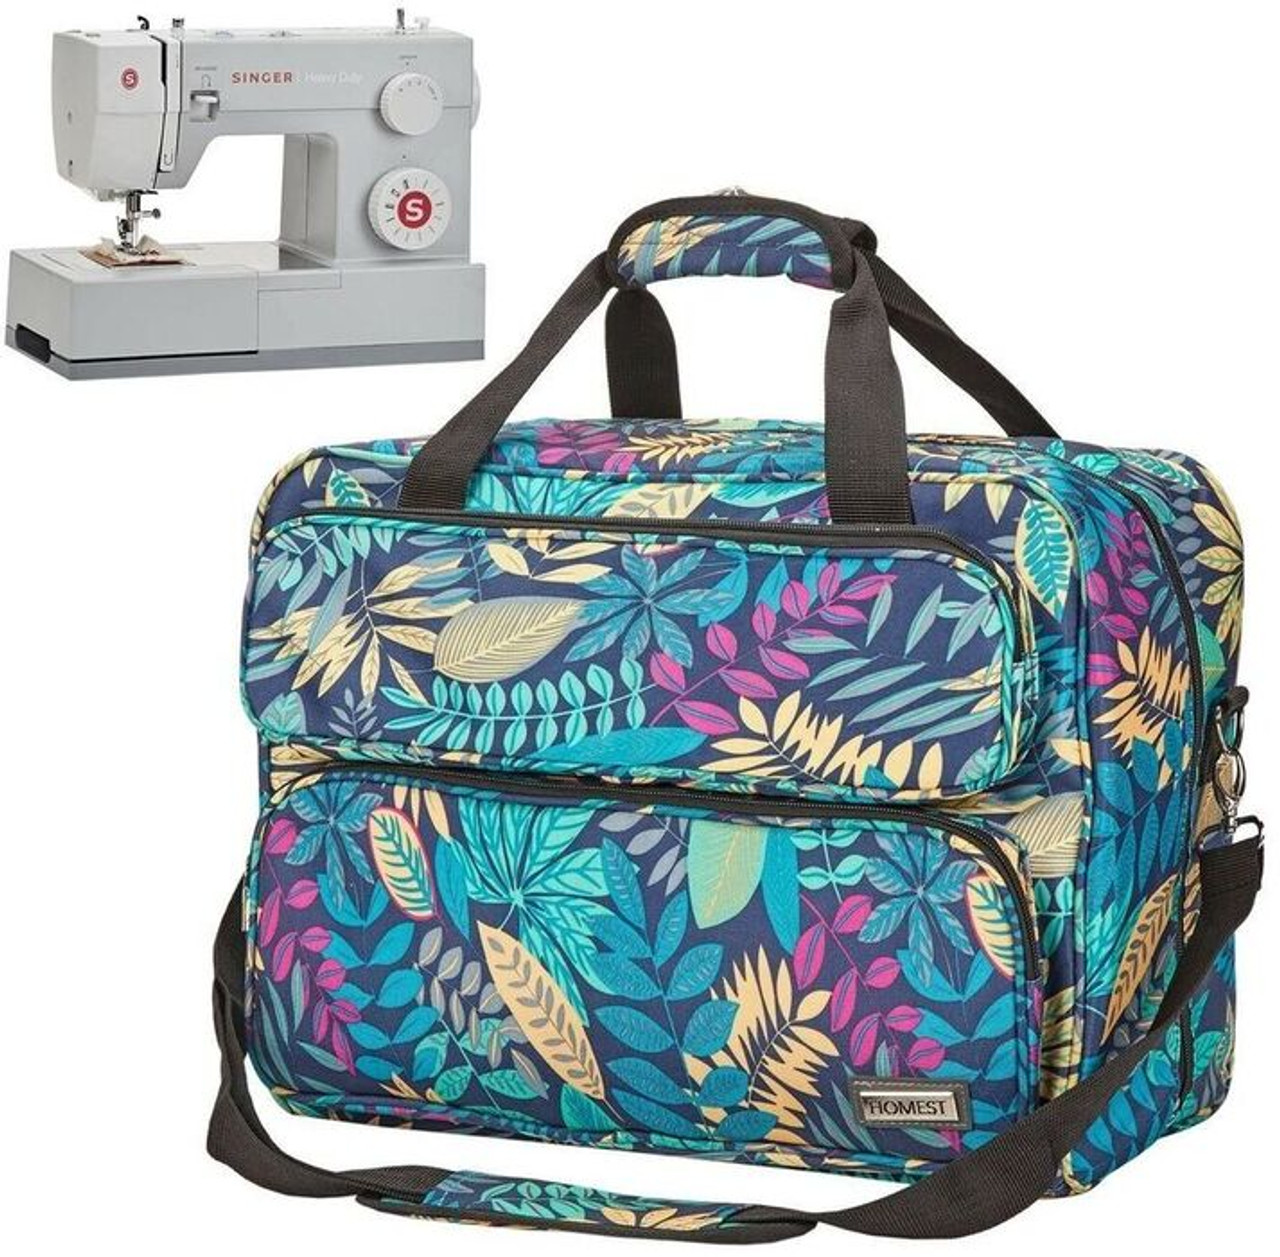 HOMEST Sewing Machine Carrying Case, Universal Tote Bag with